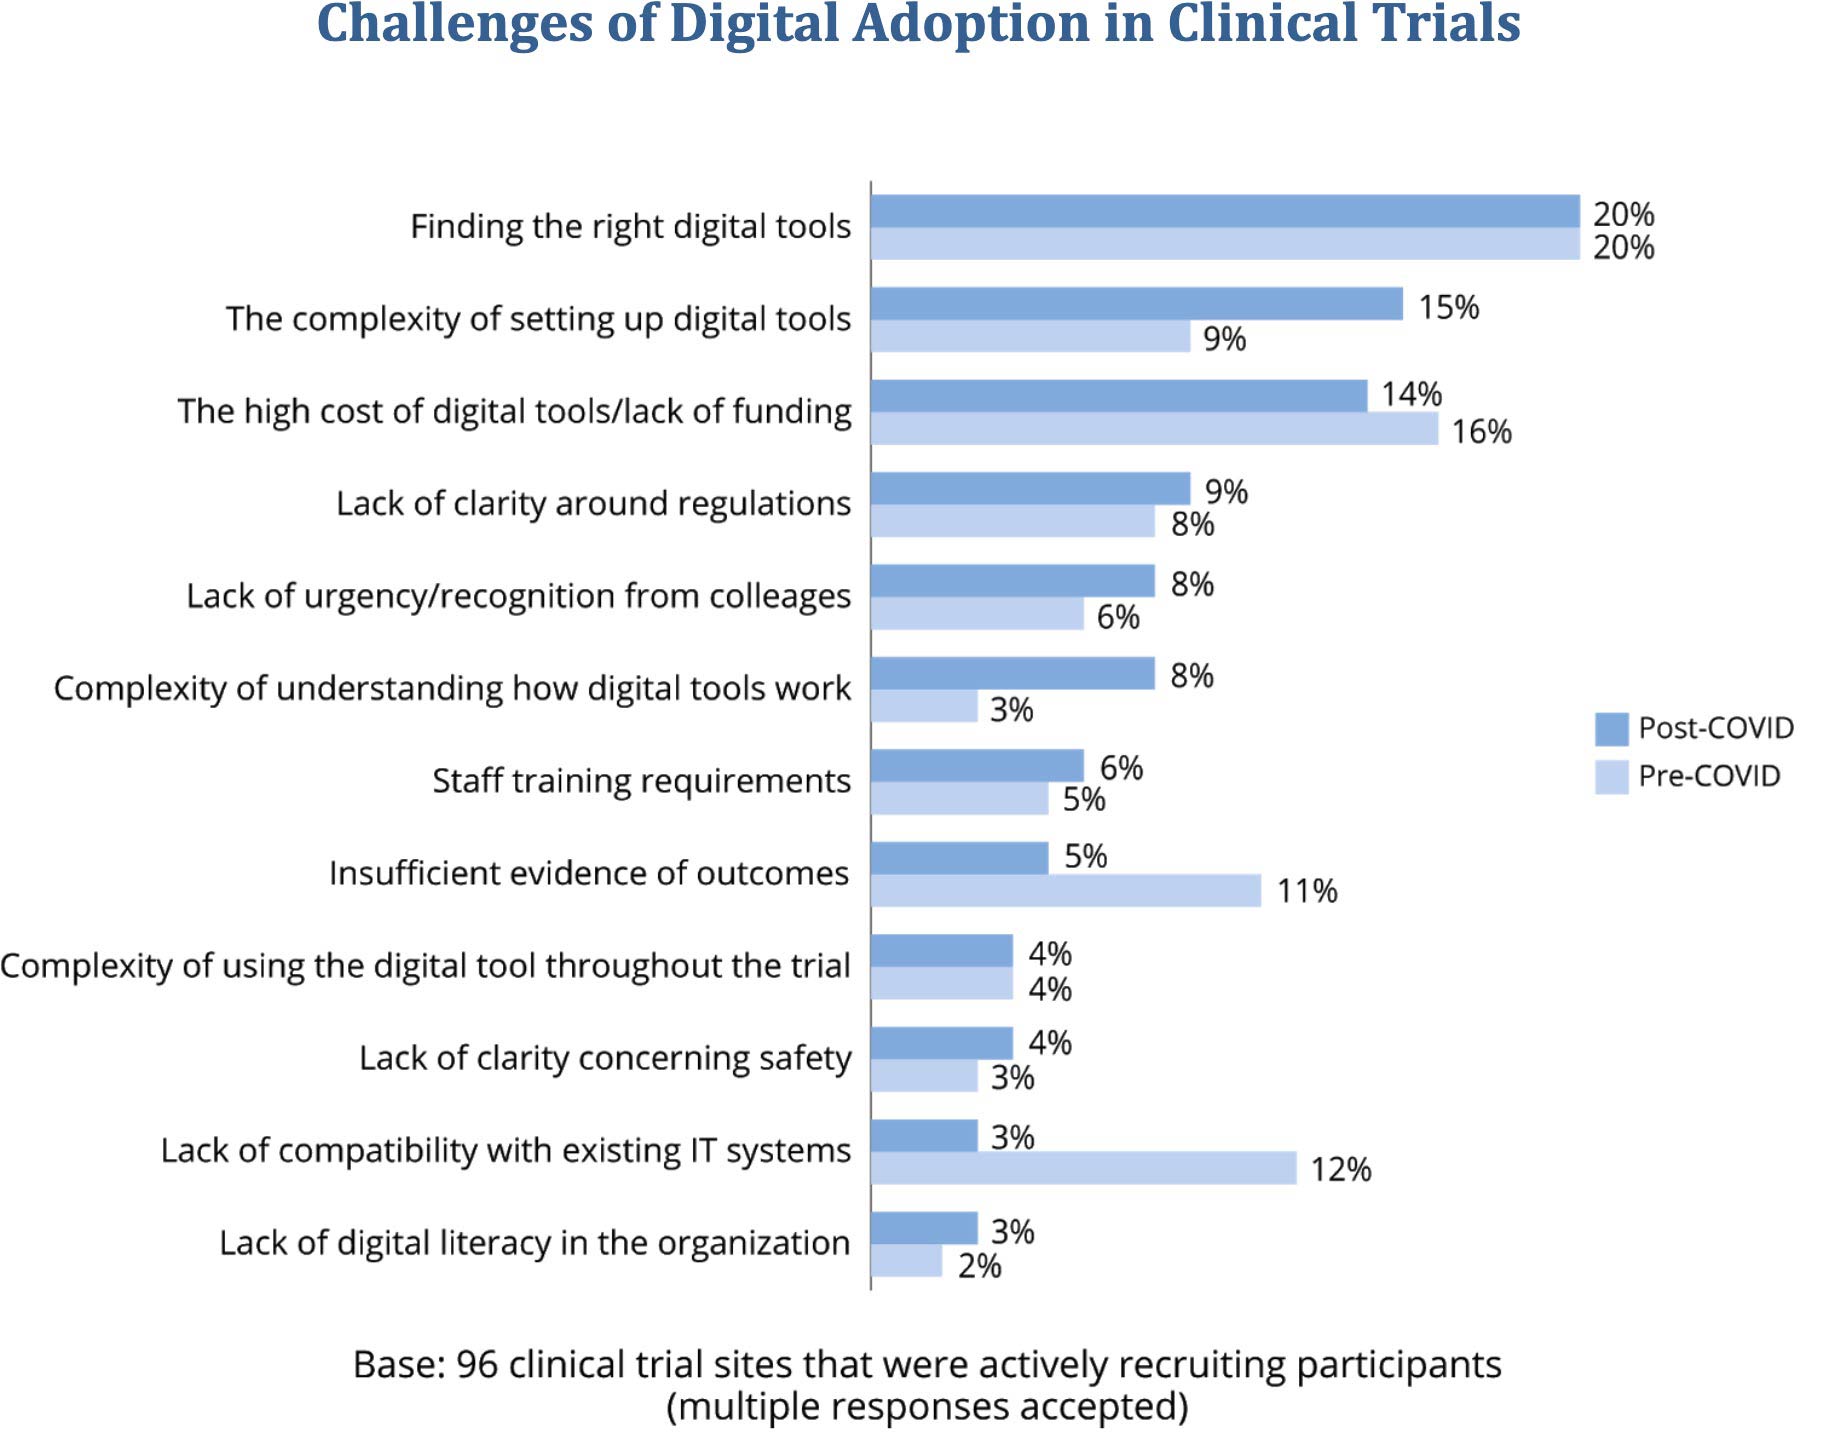 Challenges of Digital Adoption in Clinical Trials bar graph